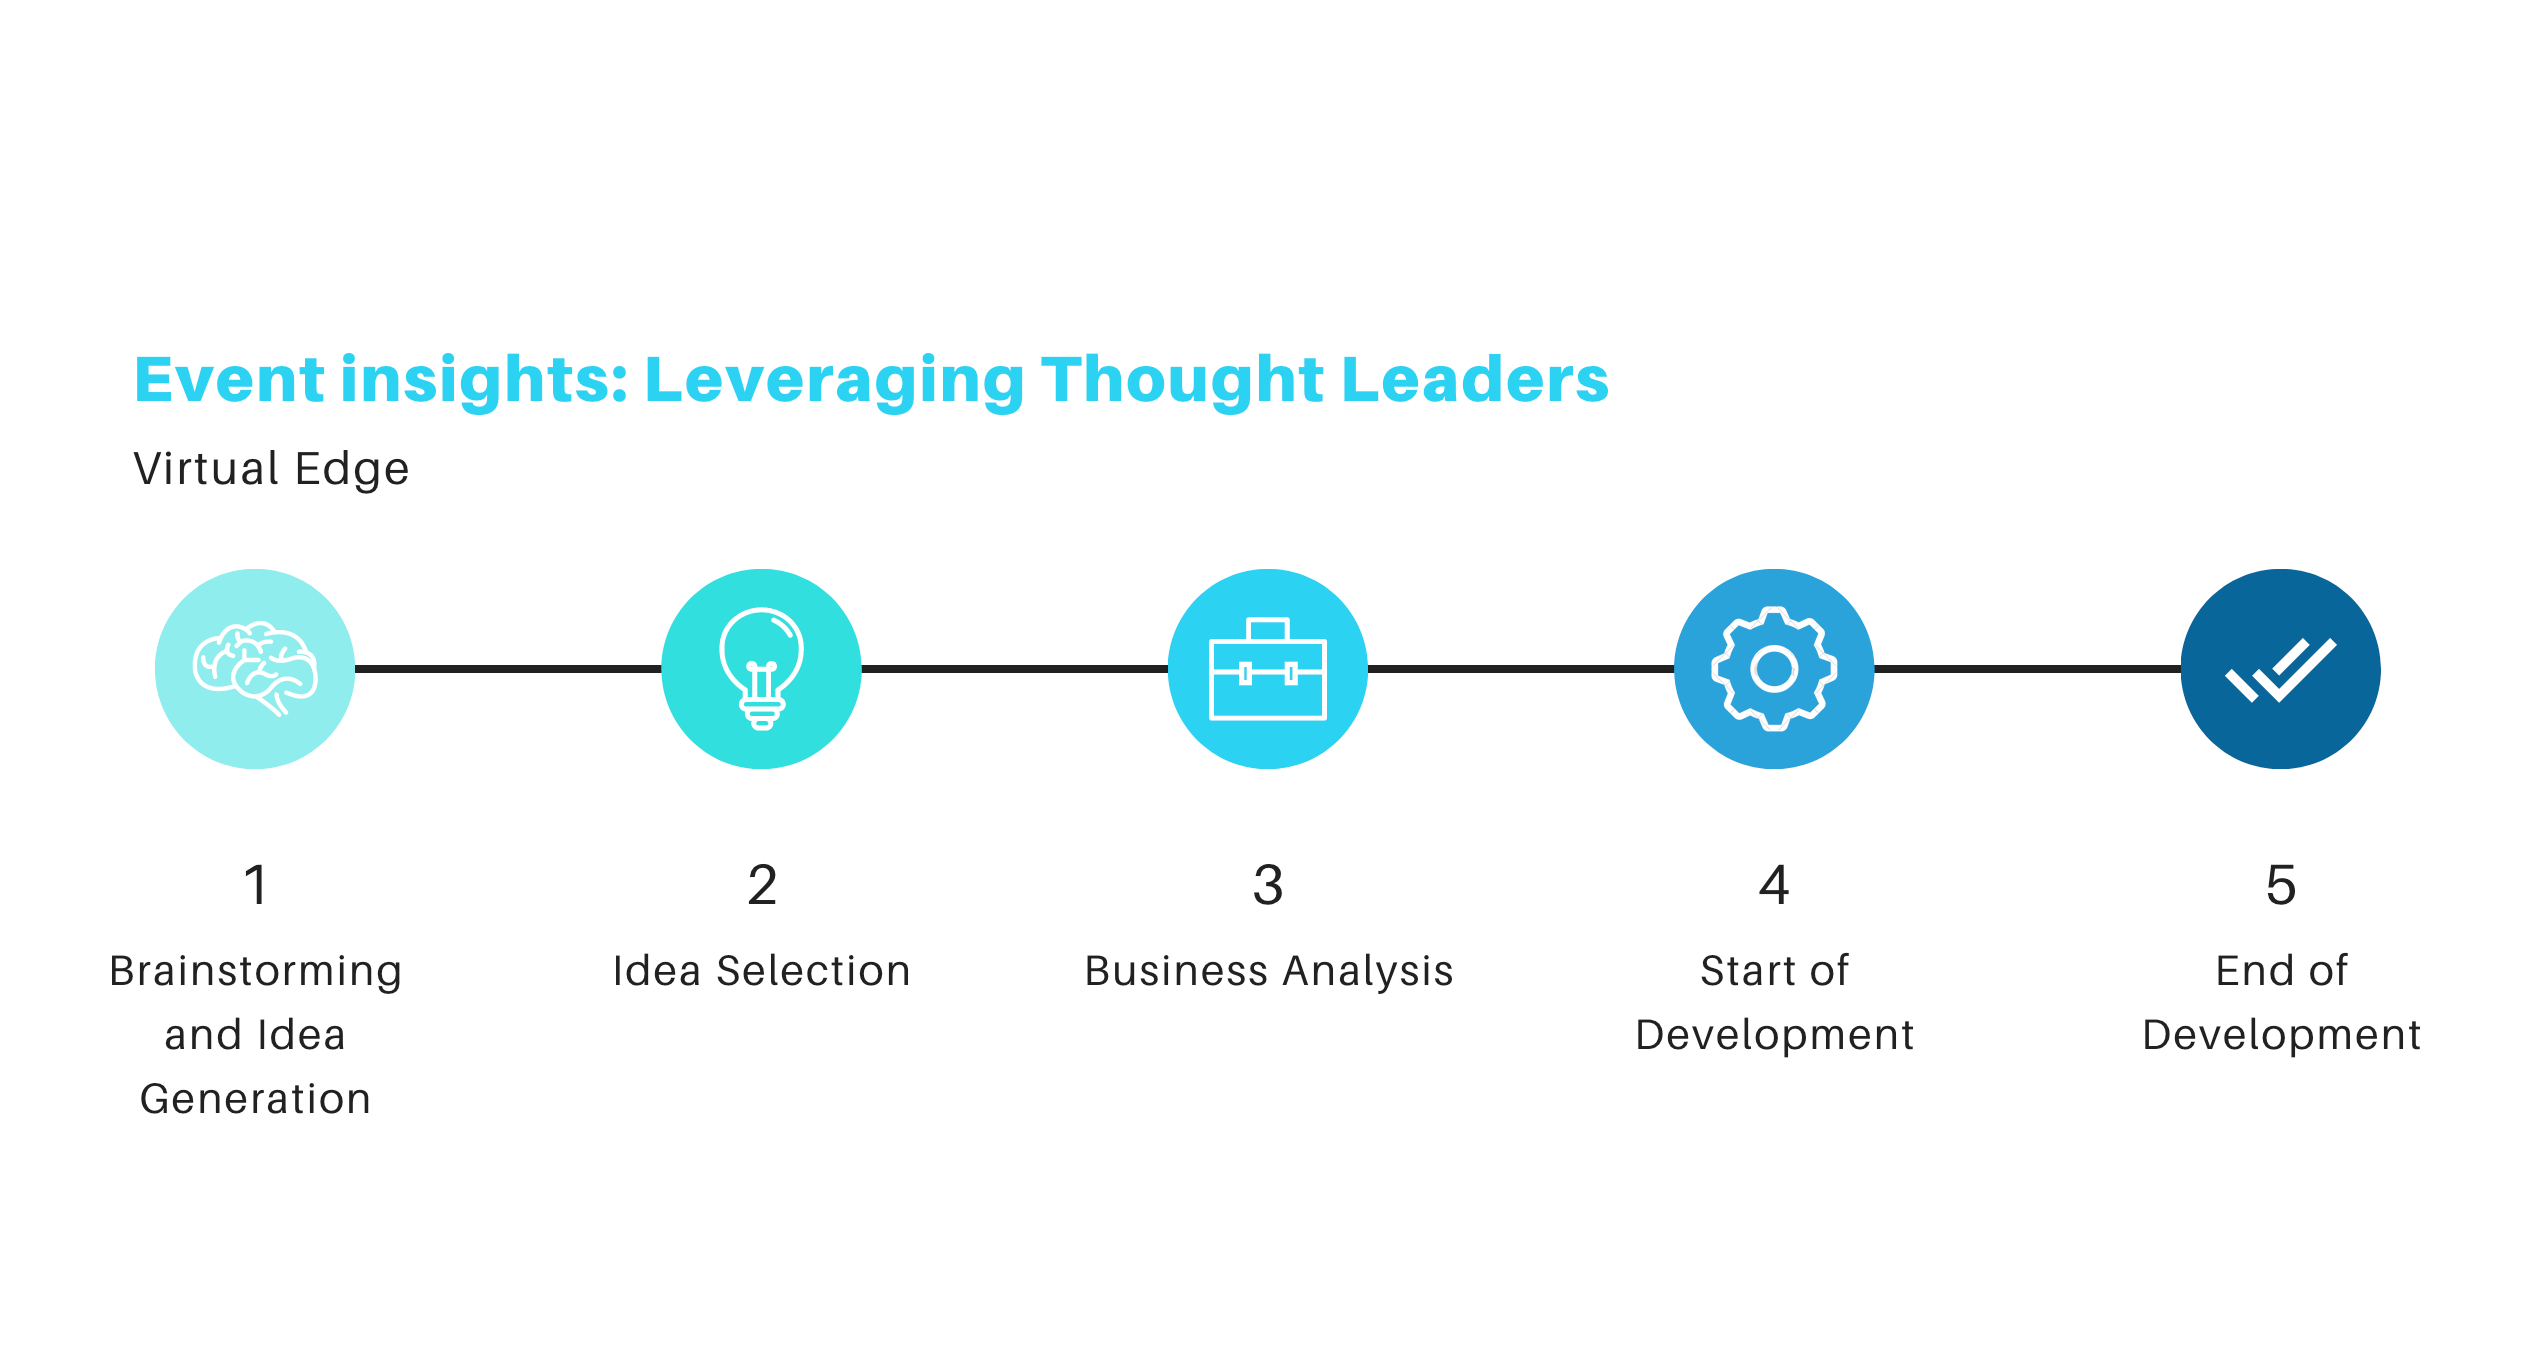 Event insights: Leveraging Thought Leaders